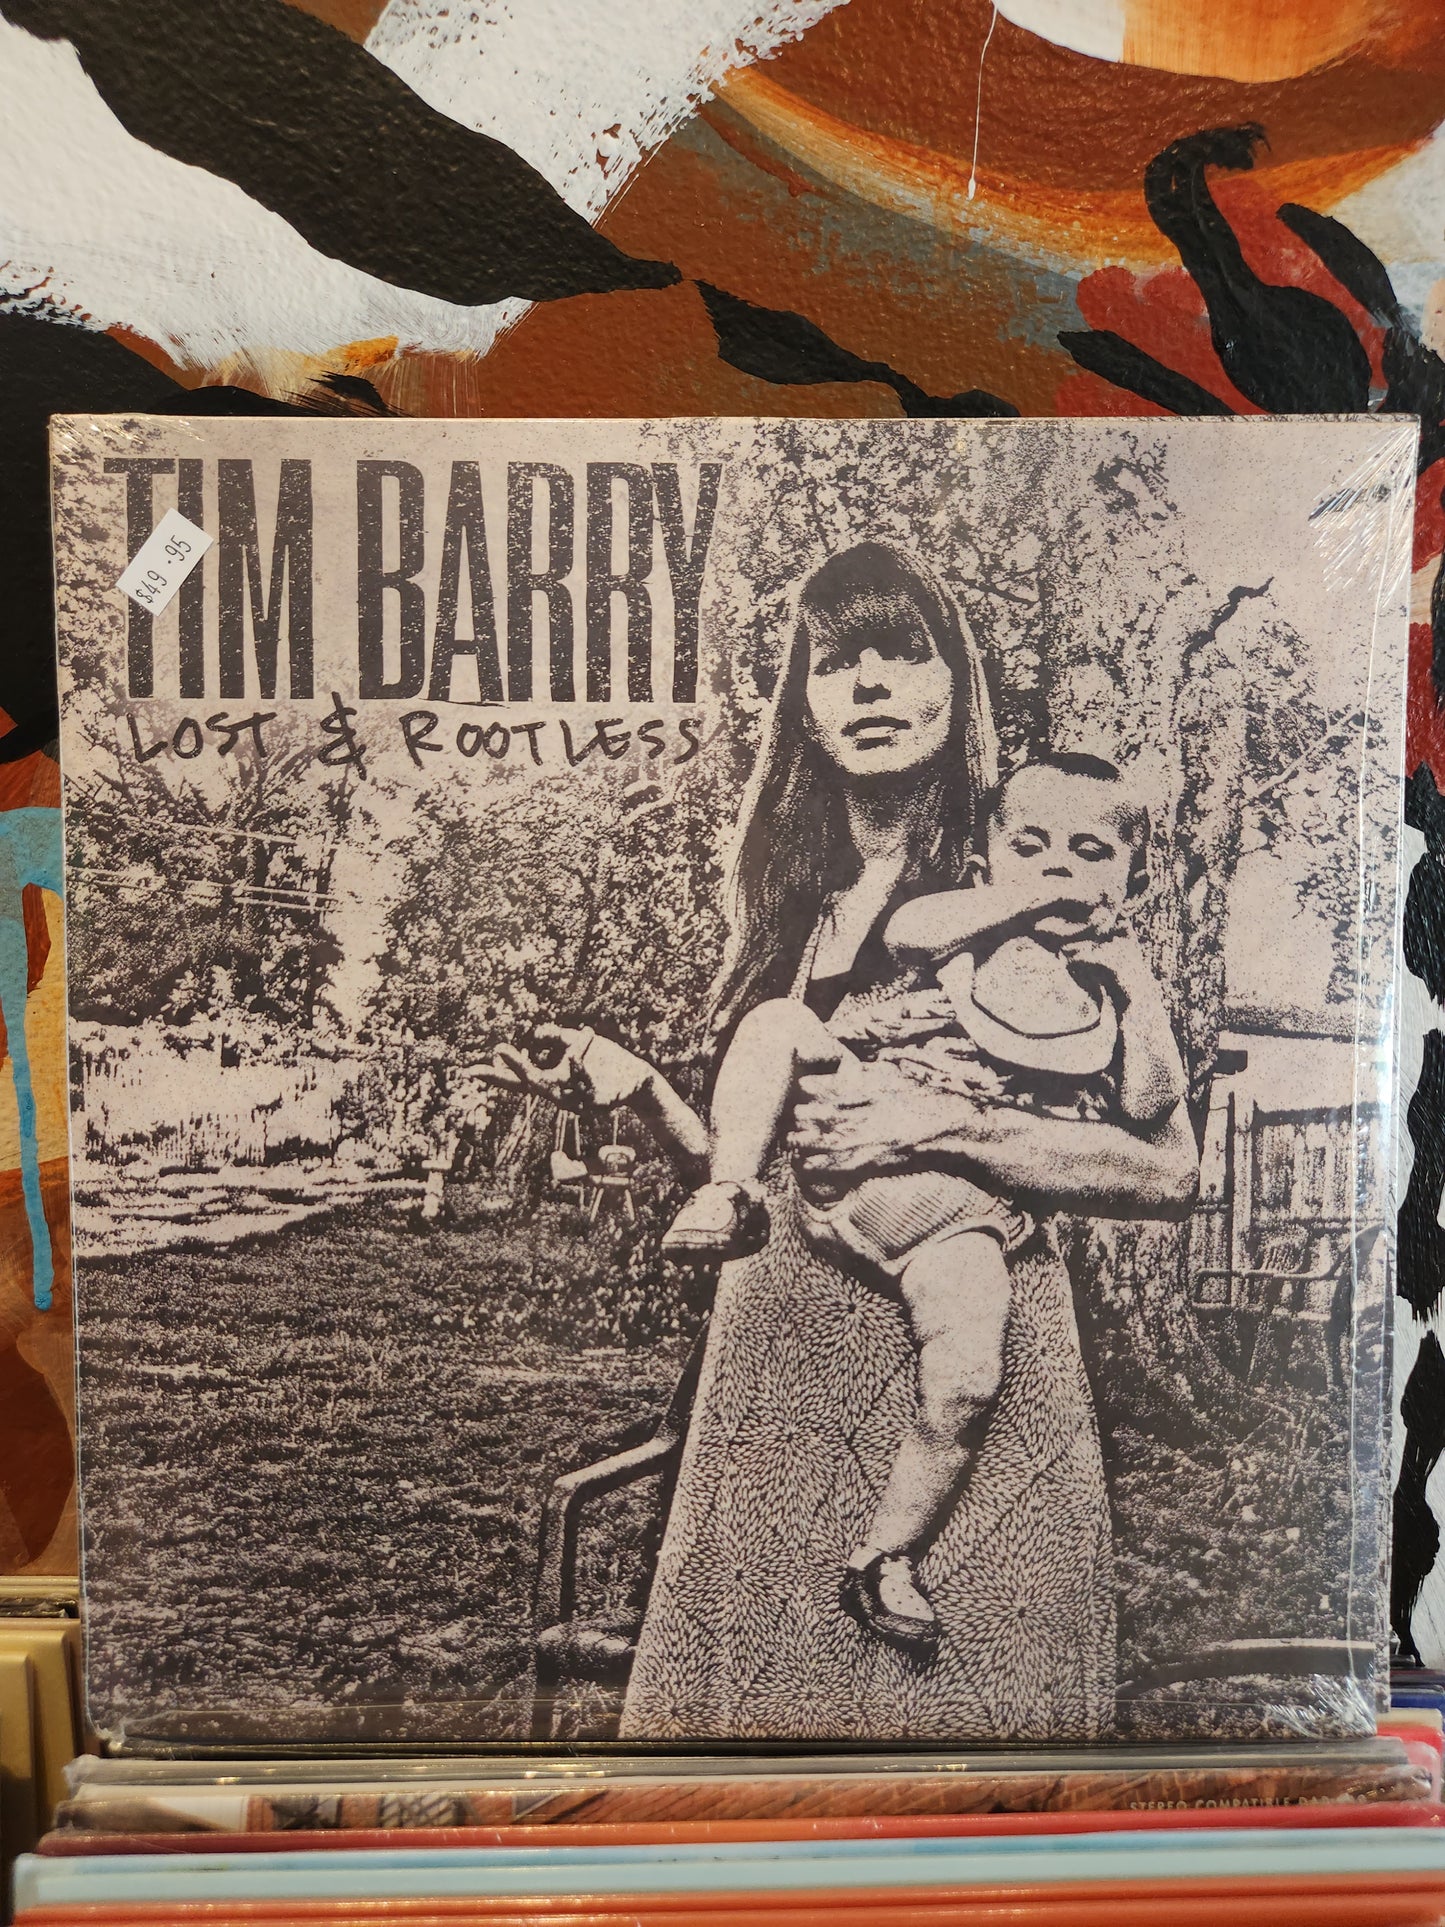 Tim Barry - Lost and Rootless - Vinyl LP